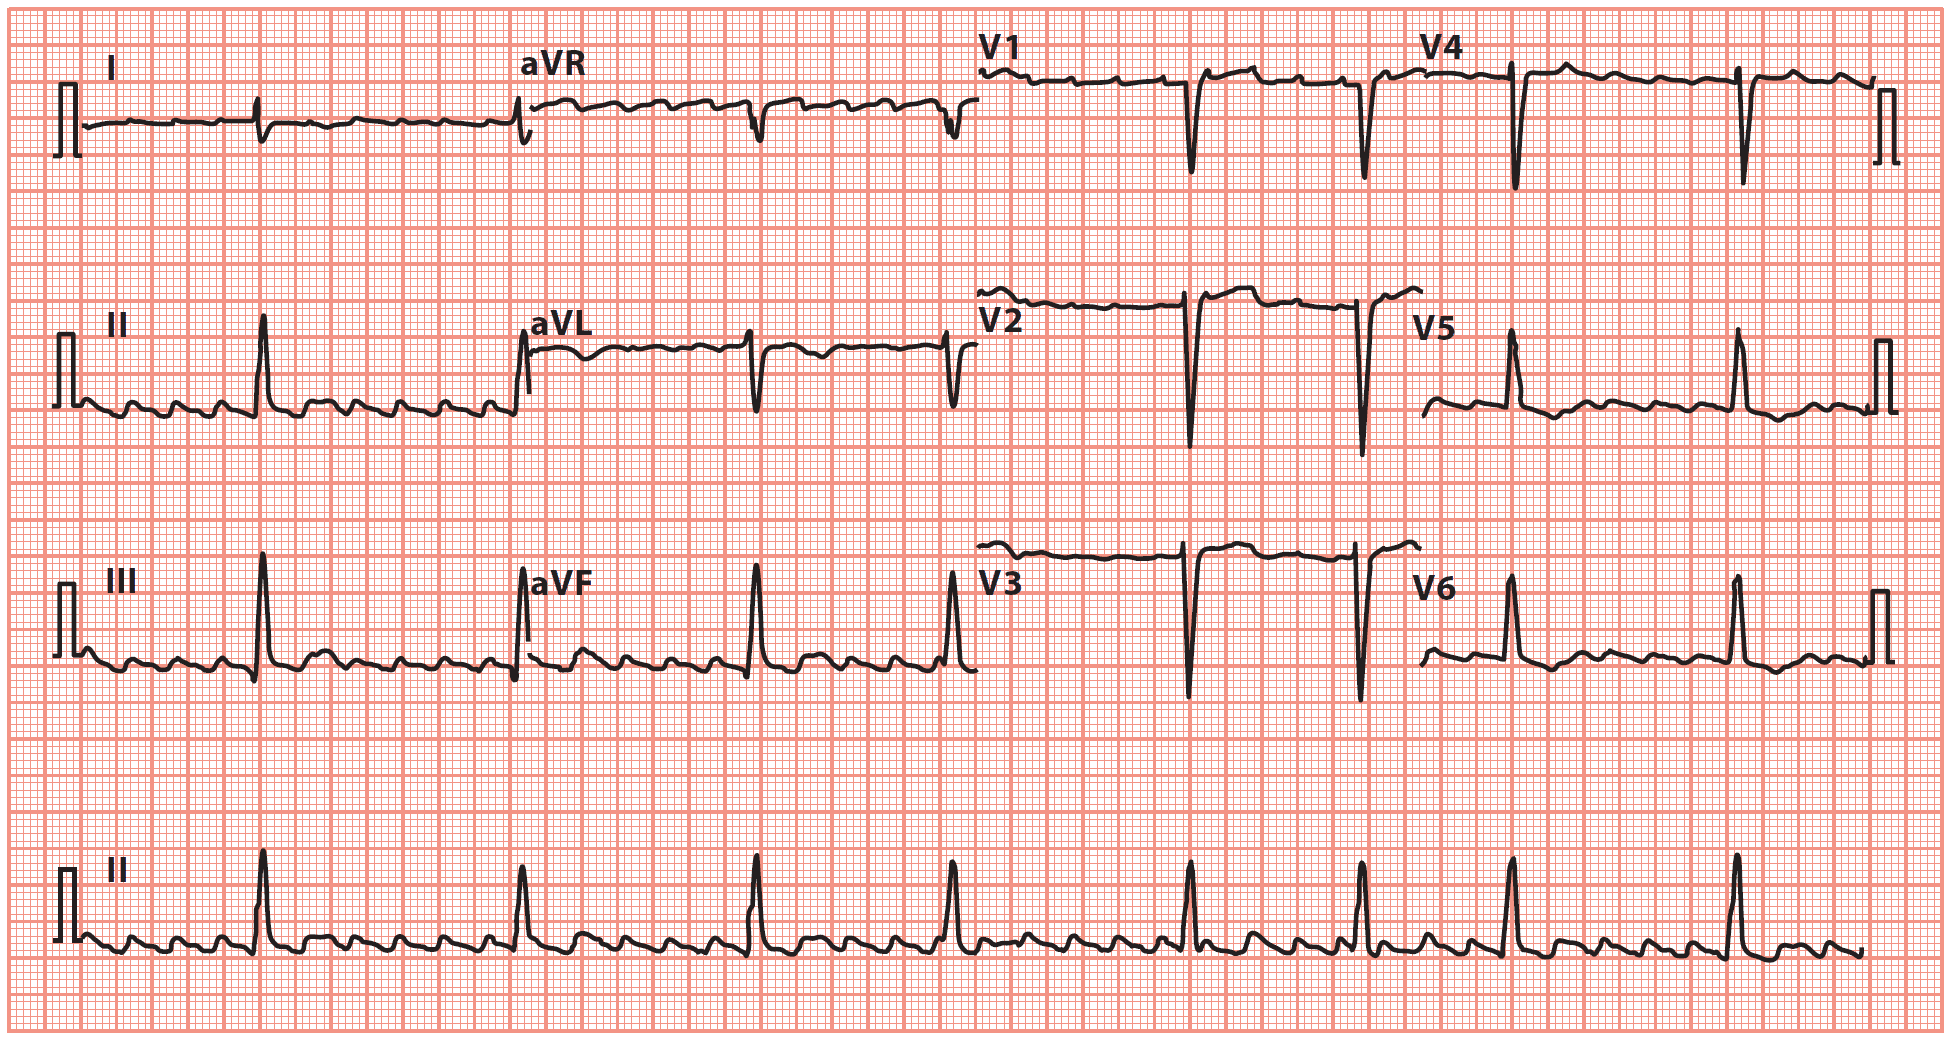 Atrial Flutter with ‘sawtooth’ pattern of atrial activity, with an atrial rate of 250/min and a ventricular rate of 48/min. The ventricular rhythm is irregular, indicating variable AV block.